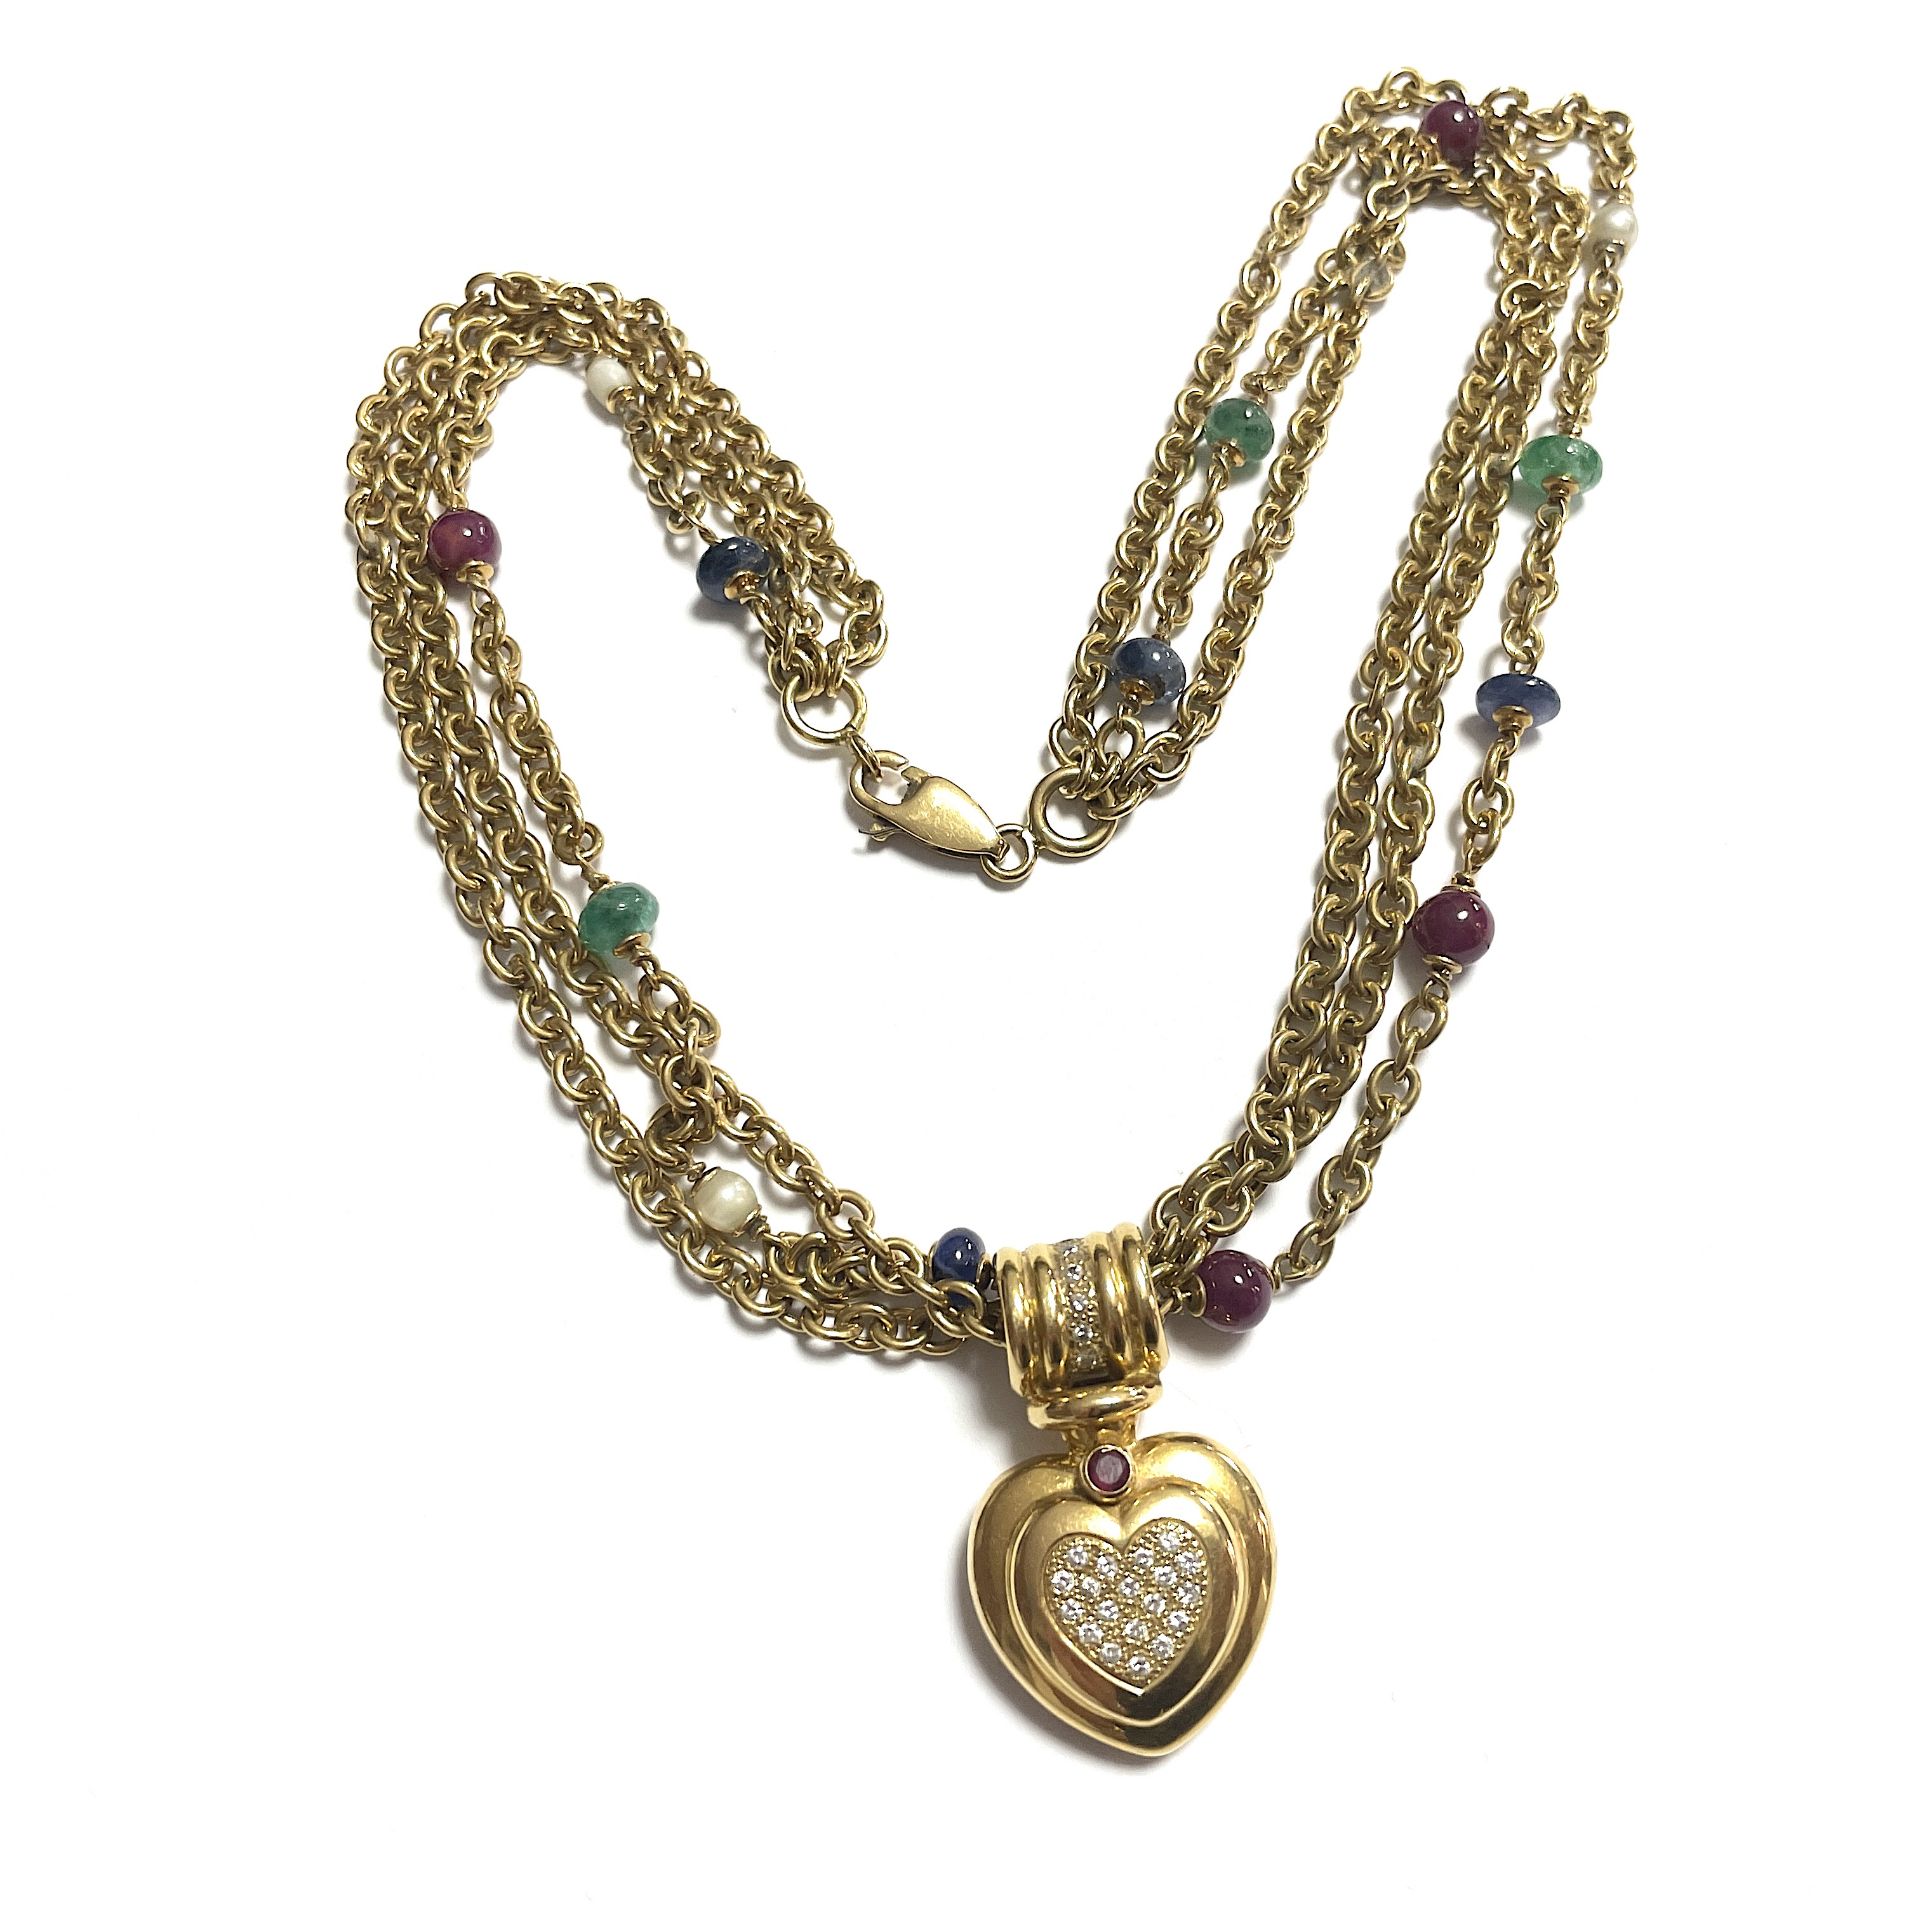 3 strands gemstone necklace with diamond heart - Image 6 of 6